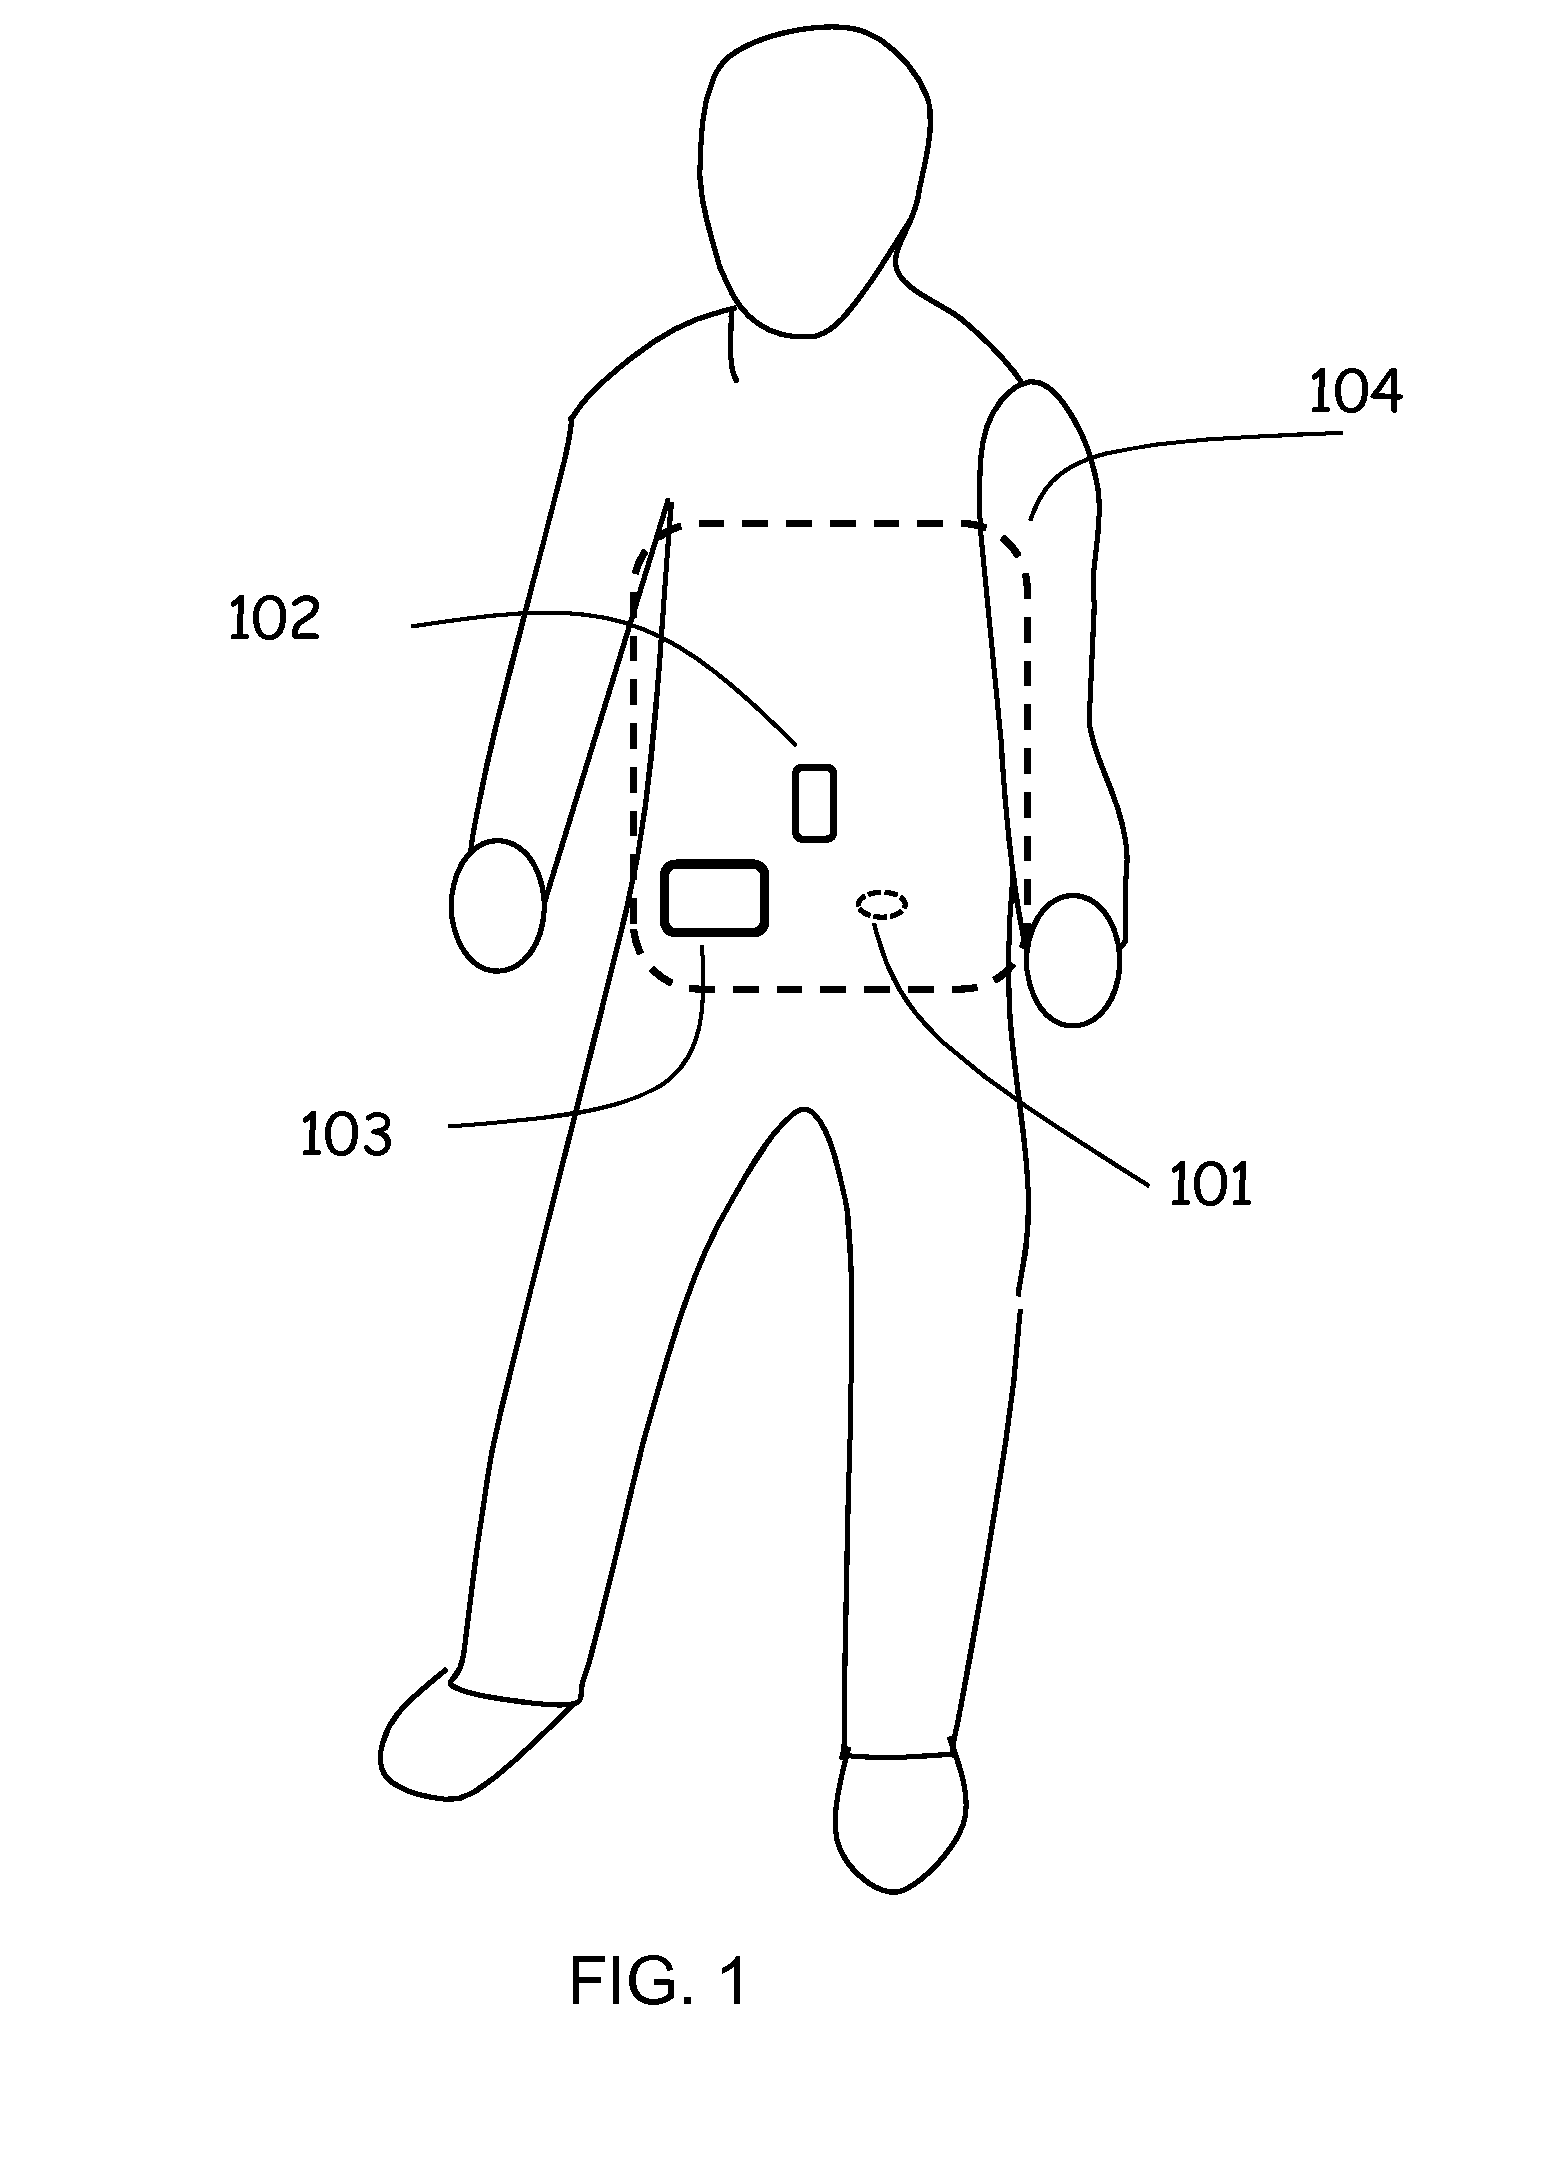 System and Method for Body and In-Vivo Device, Motion and Orientation Sensing and Analysis